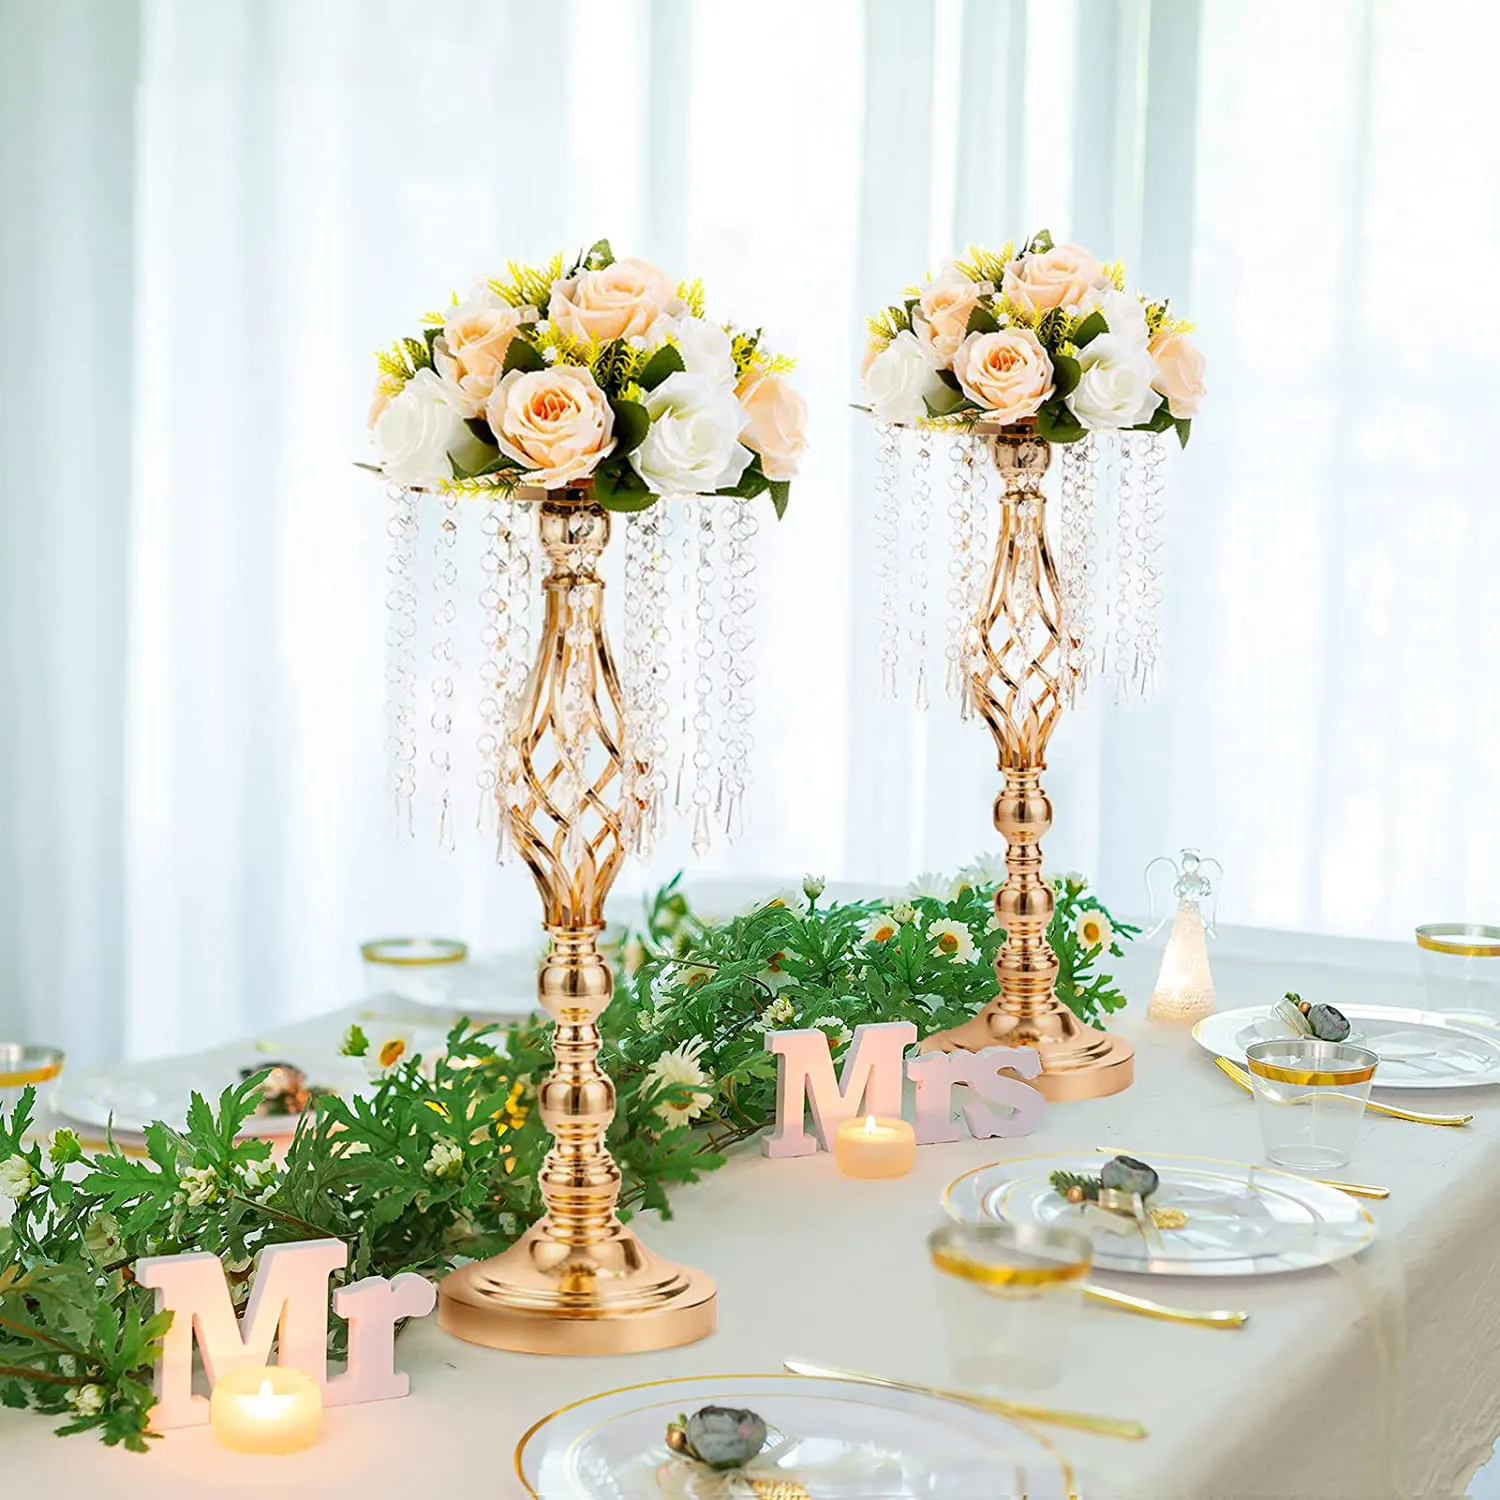 Nicro Wedding Party Table Centerpieces Luxury Metal Flower Rack Stand Flower Frame With Crystal Chain For Hotel Home Decoration